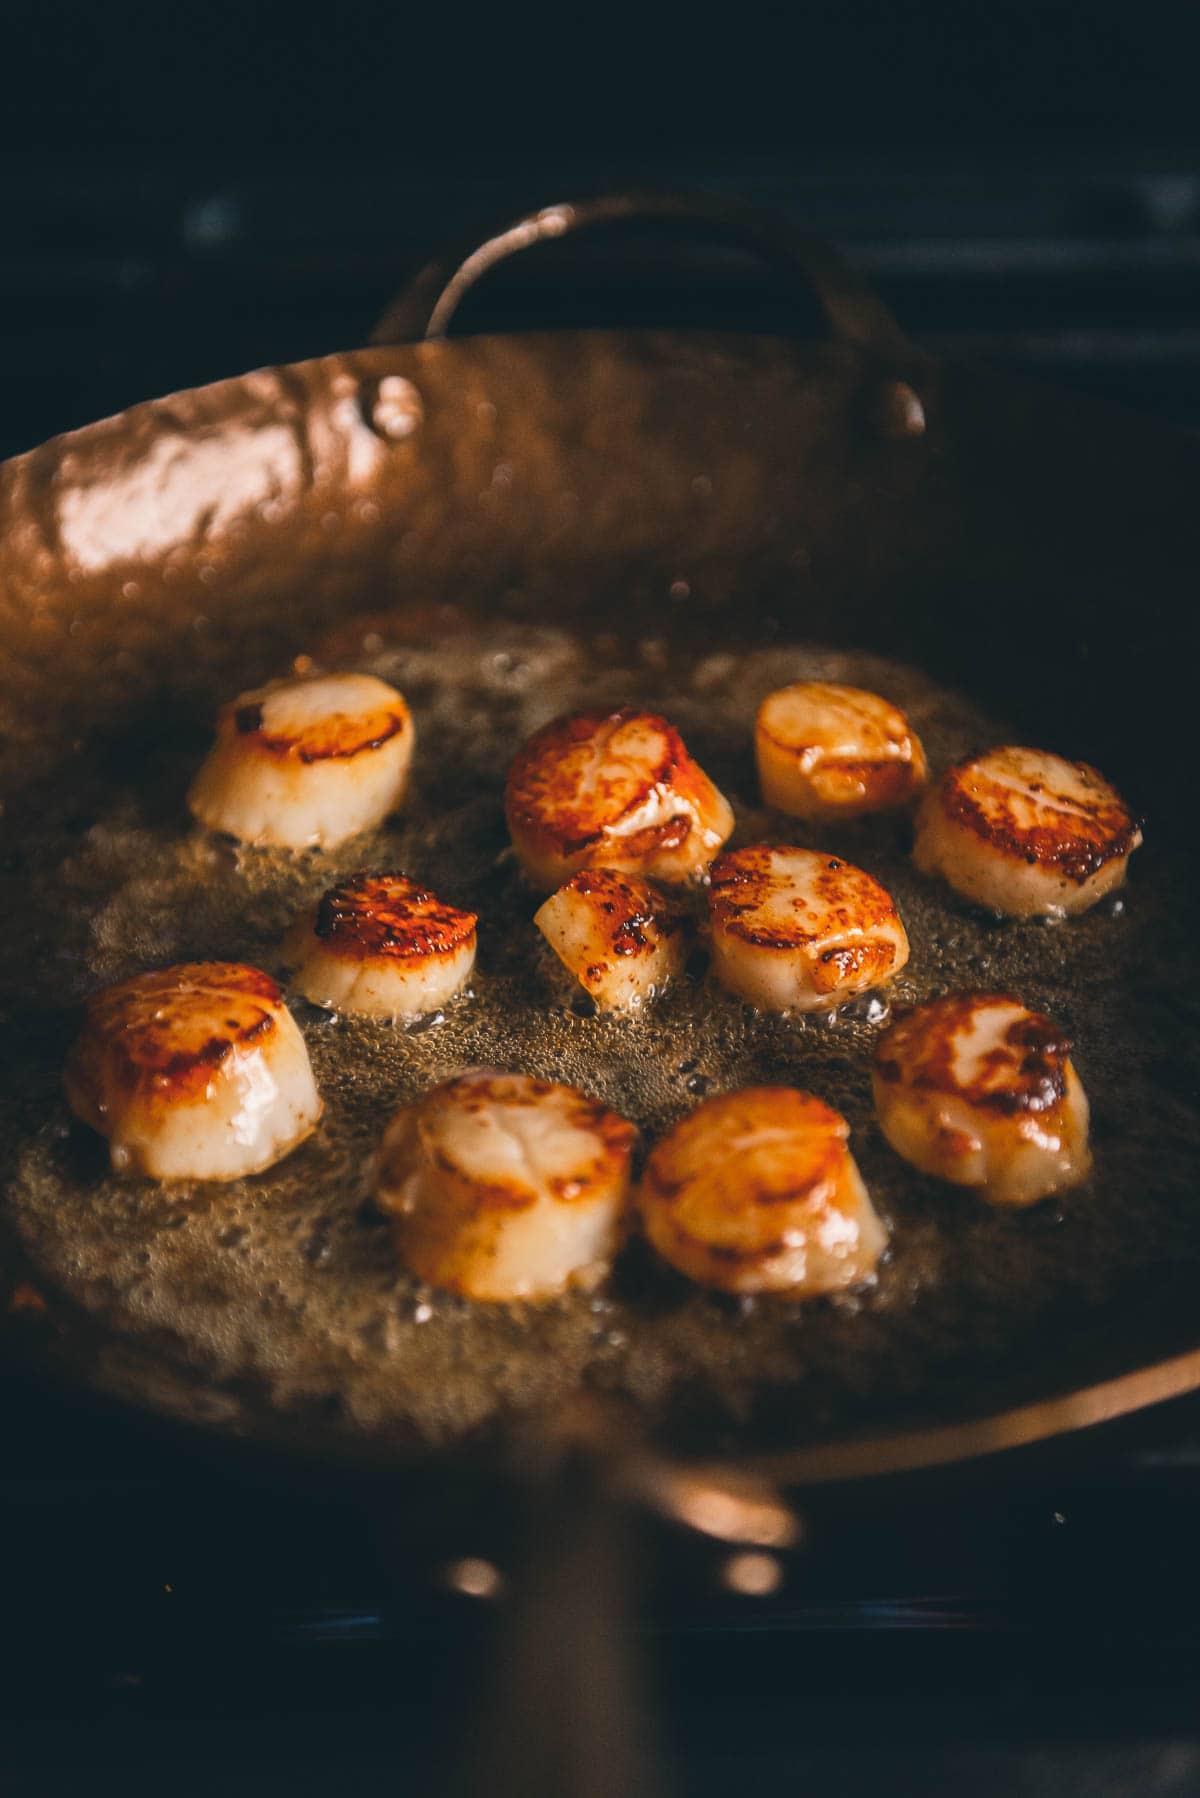 Scallops in a frying pan on the stove.